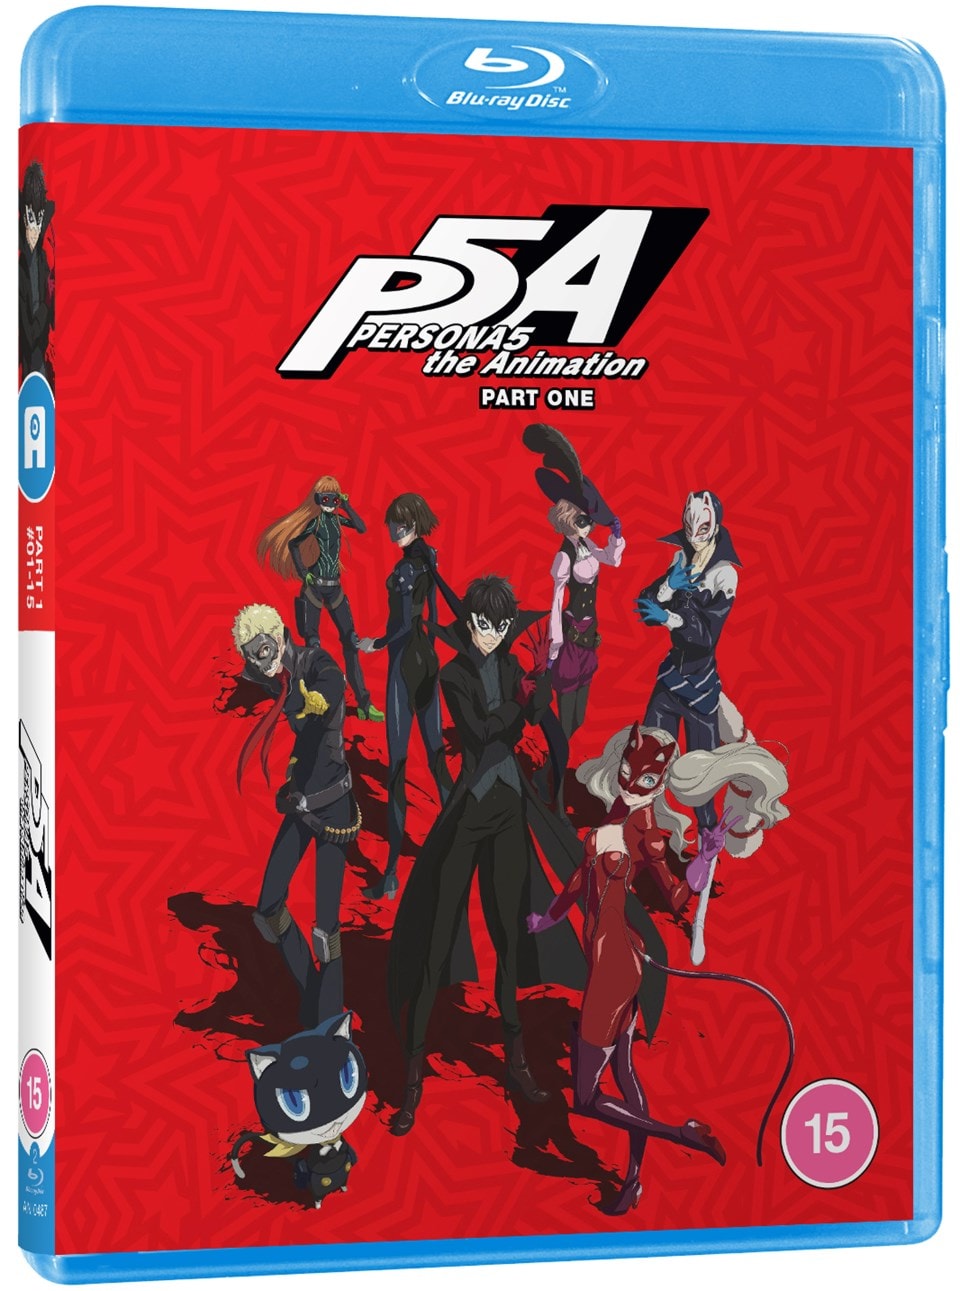 Persona 5: The Animation - Part One | Blu-ray | Free shipping over £20 ...